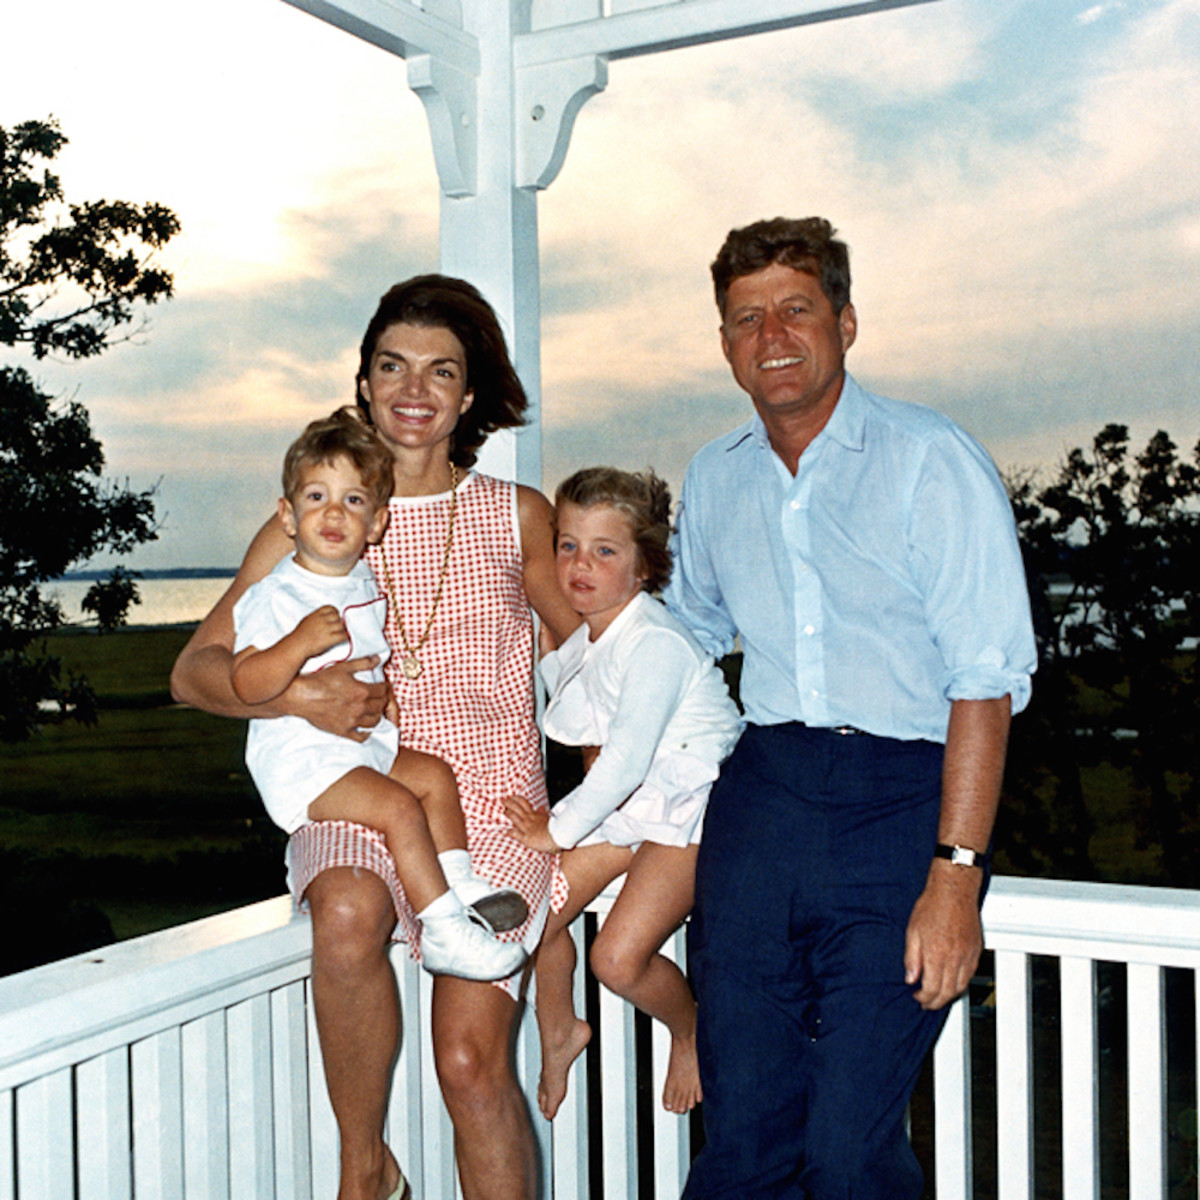 The Kennedy family at their beloved Hyannis Port, 04 August 1962